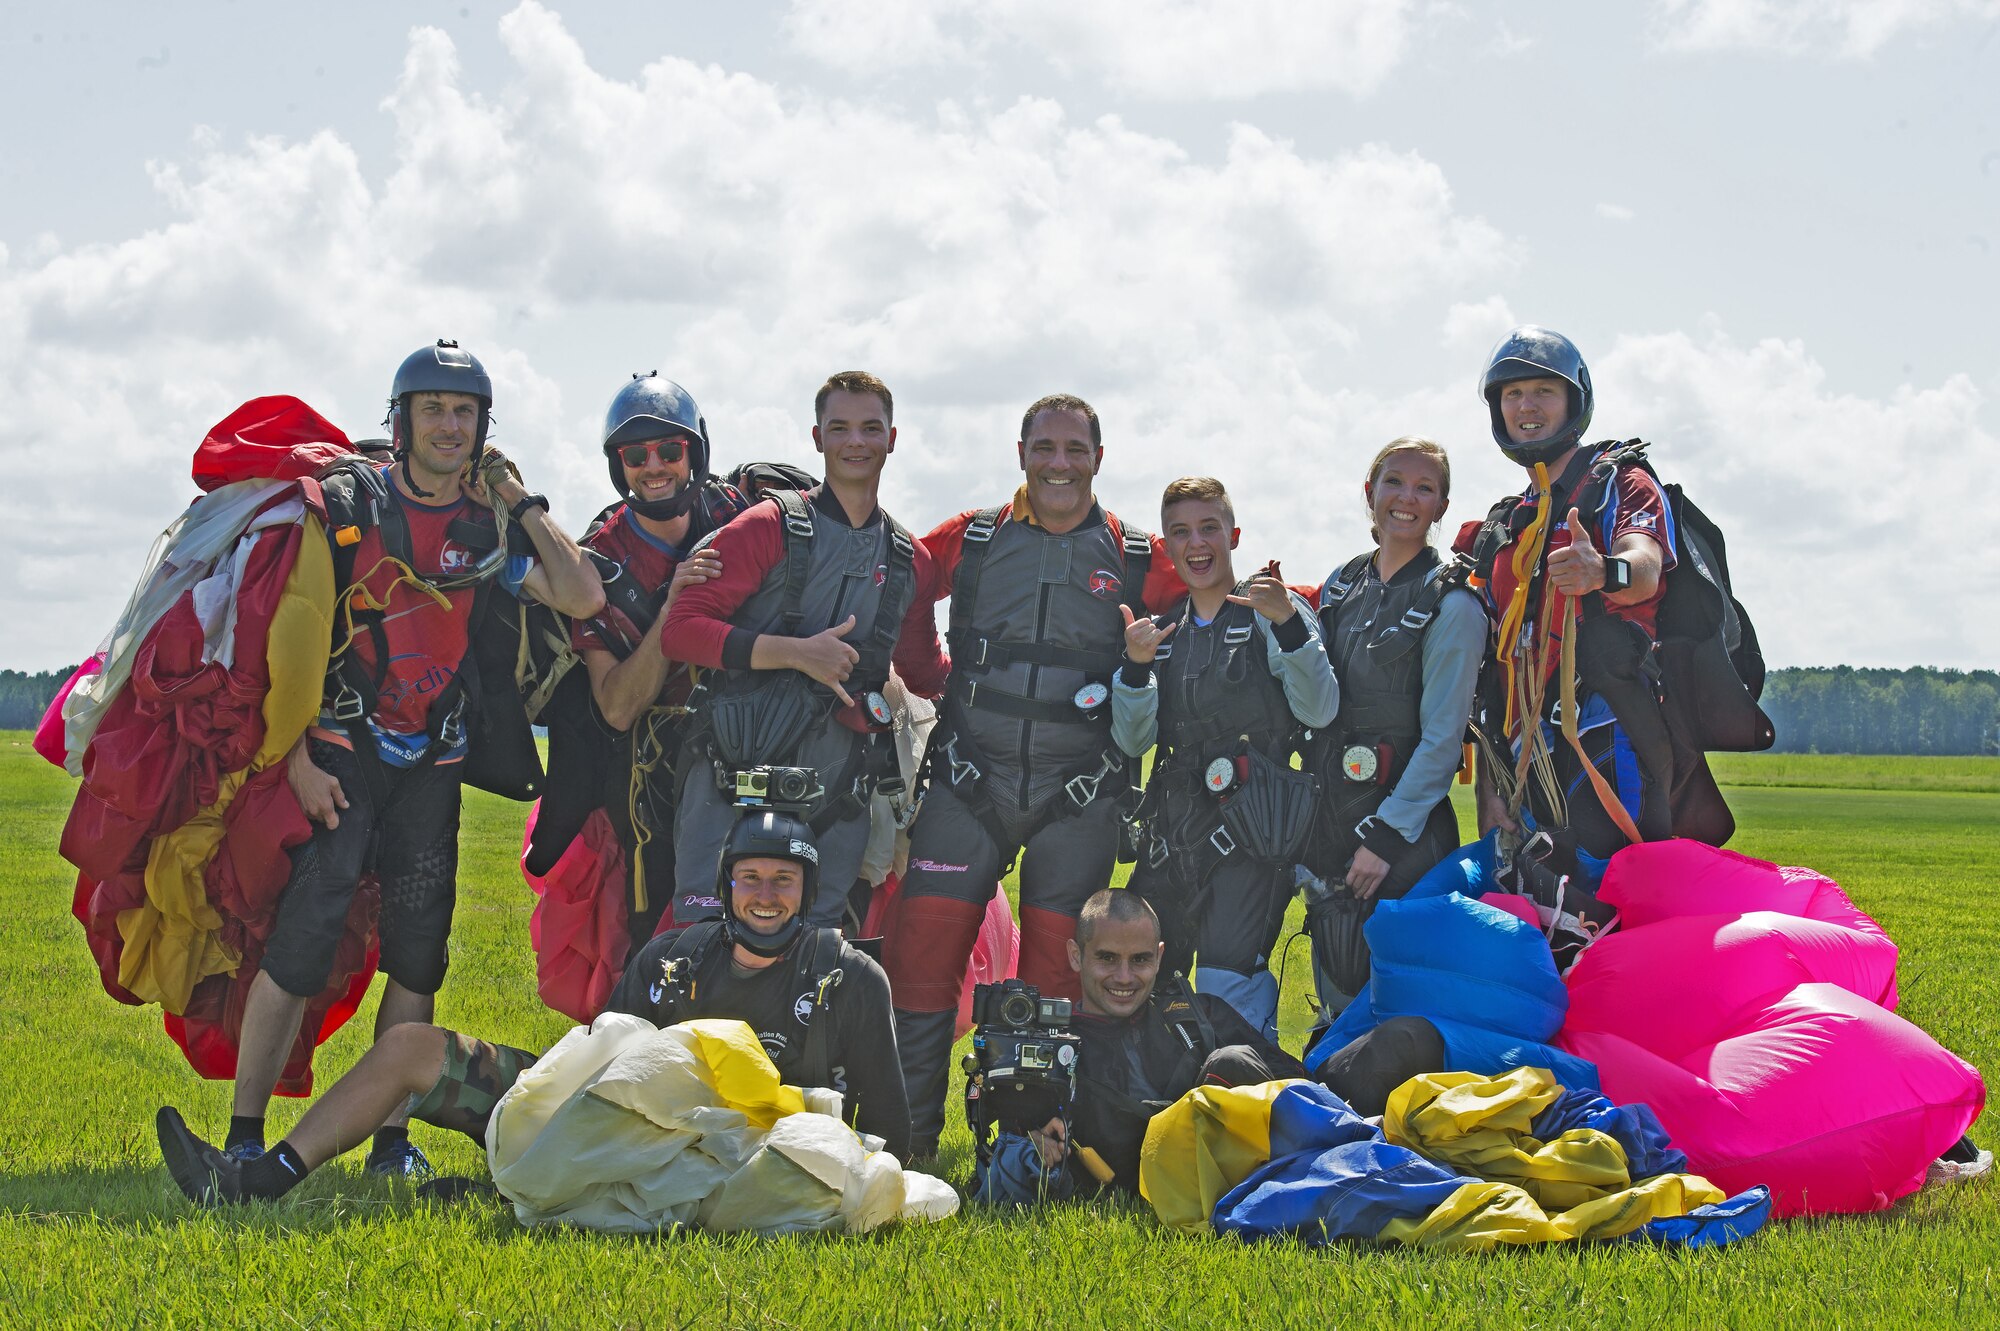 U.S. Air Force Team Shaw Airmen pose with their tandem skydiving instructors in Chester, S.C., Aug. 11, 2018.